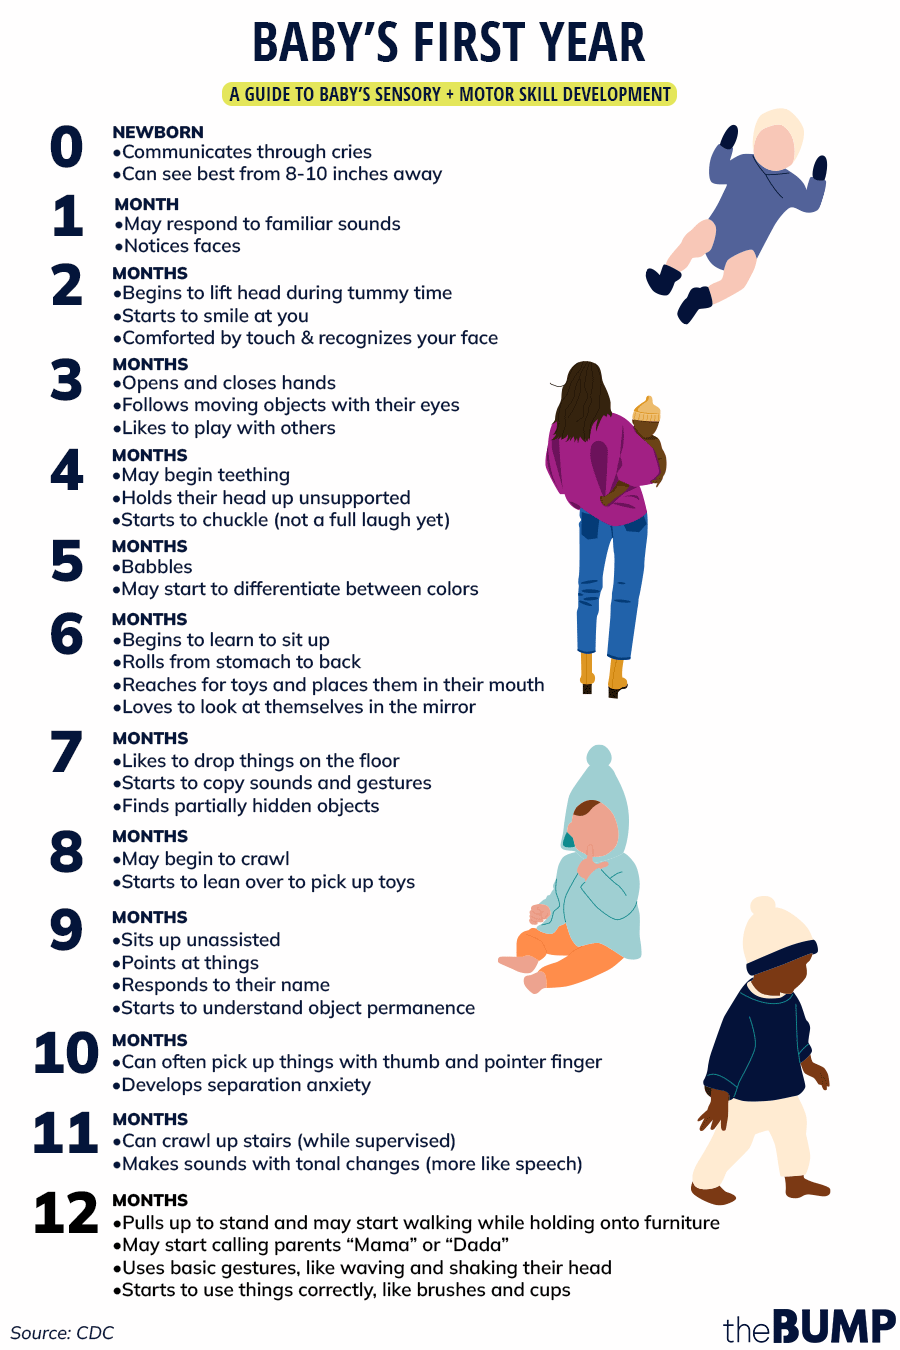 Ultimate Baby Feeding Chart: First Year Guide